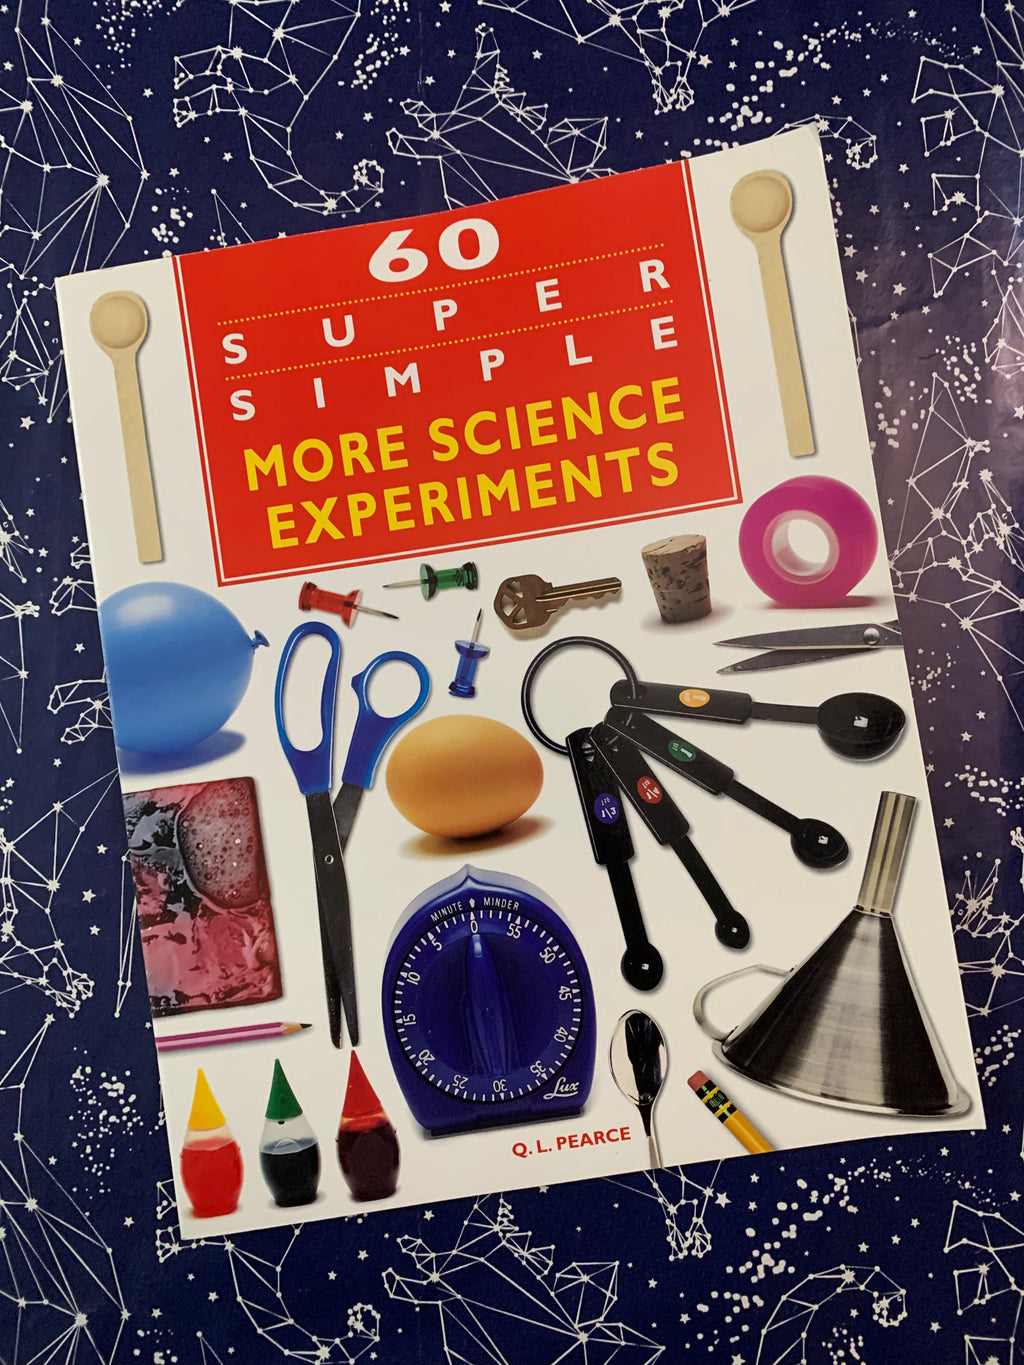 60 Super Simple: More Science Experiments- By Q.L. Pearce